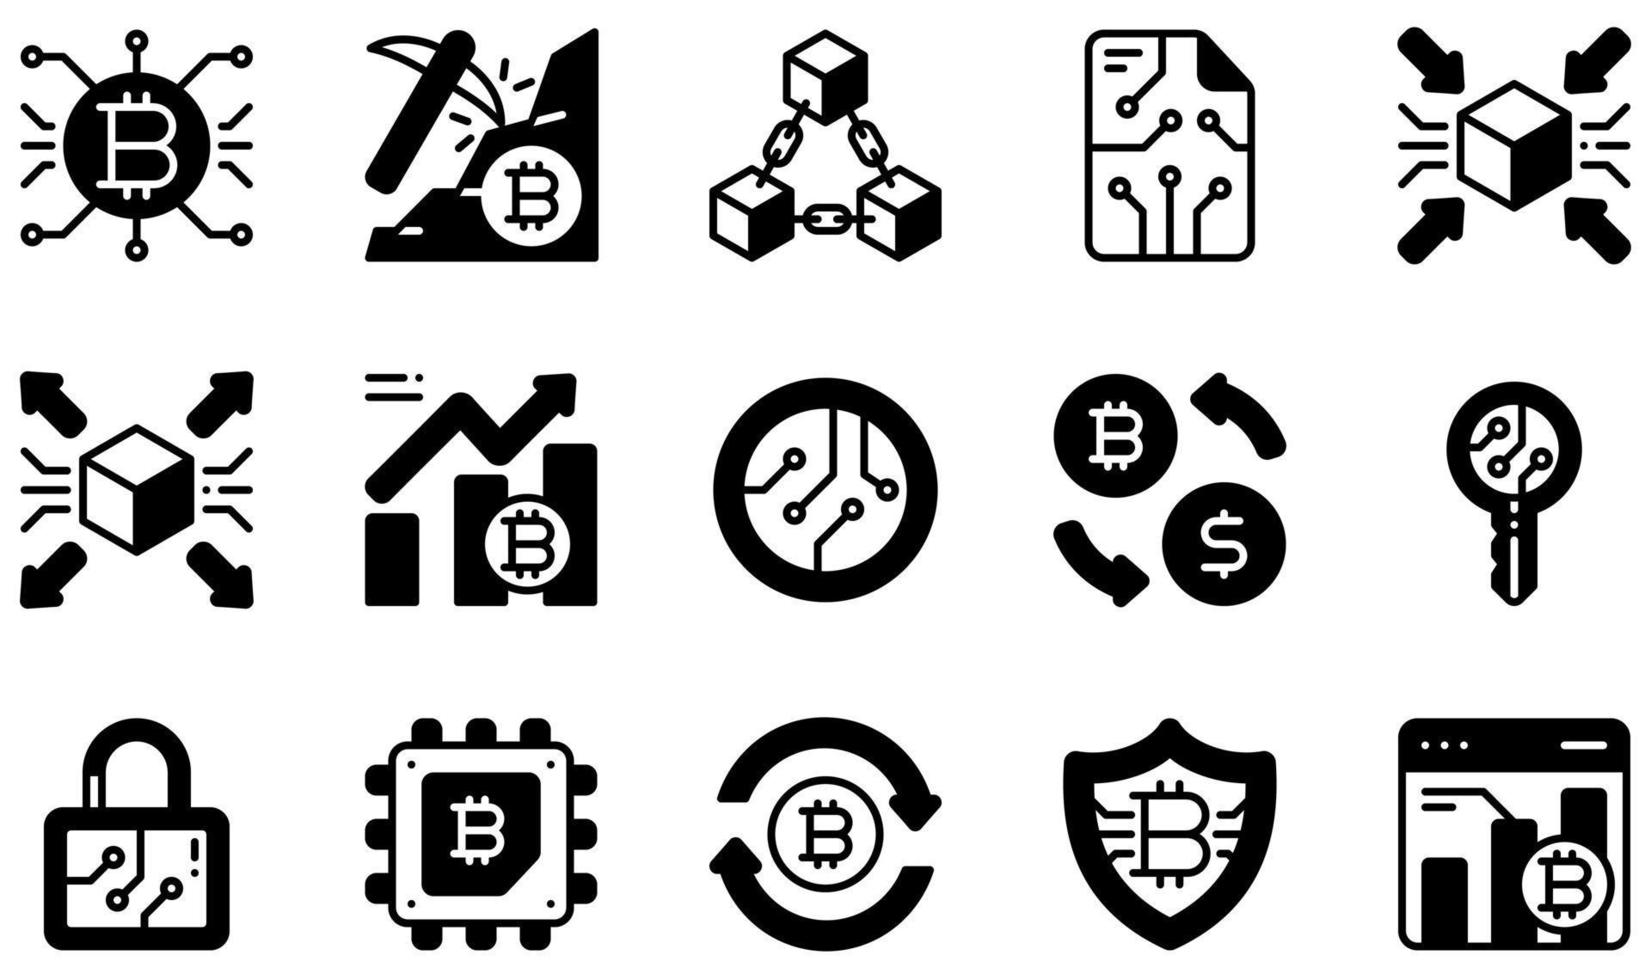 Set of Vector Icons Related to Cryptocurrency. Contains such Icons as Cryptocurrency, Mining, Blockchain, Smart Contracts, Centralized, Decentralized and more.